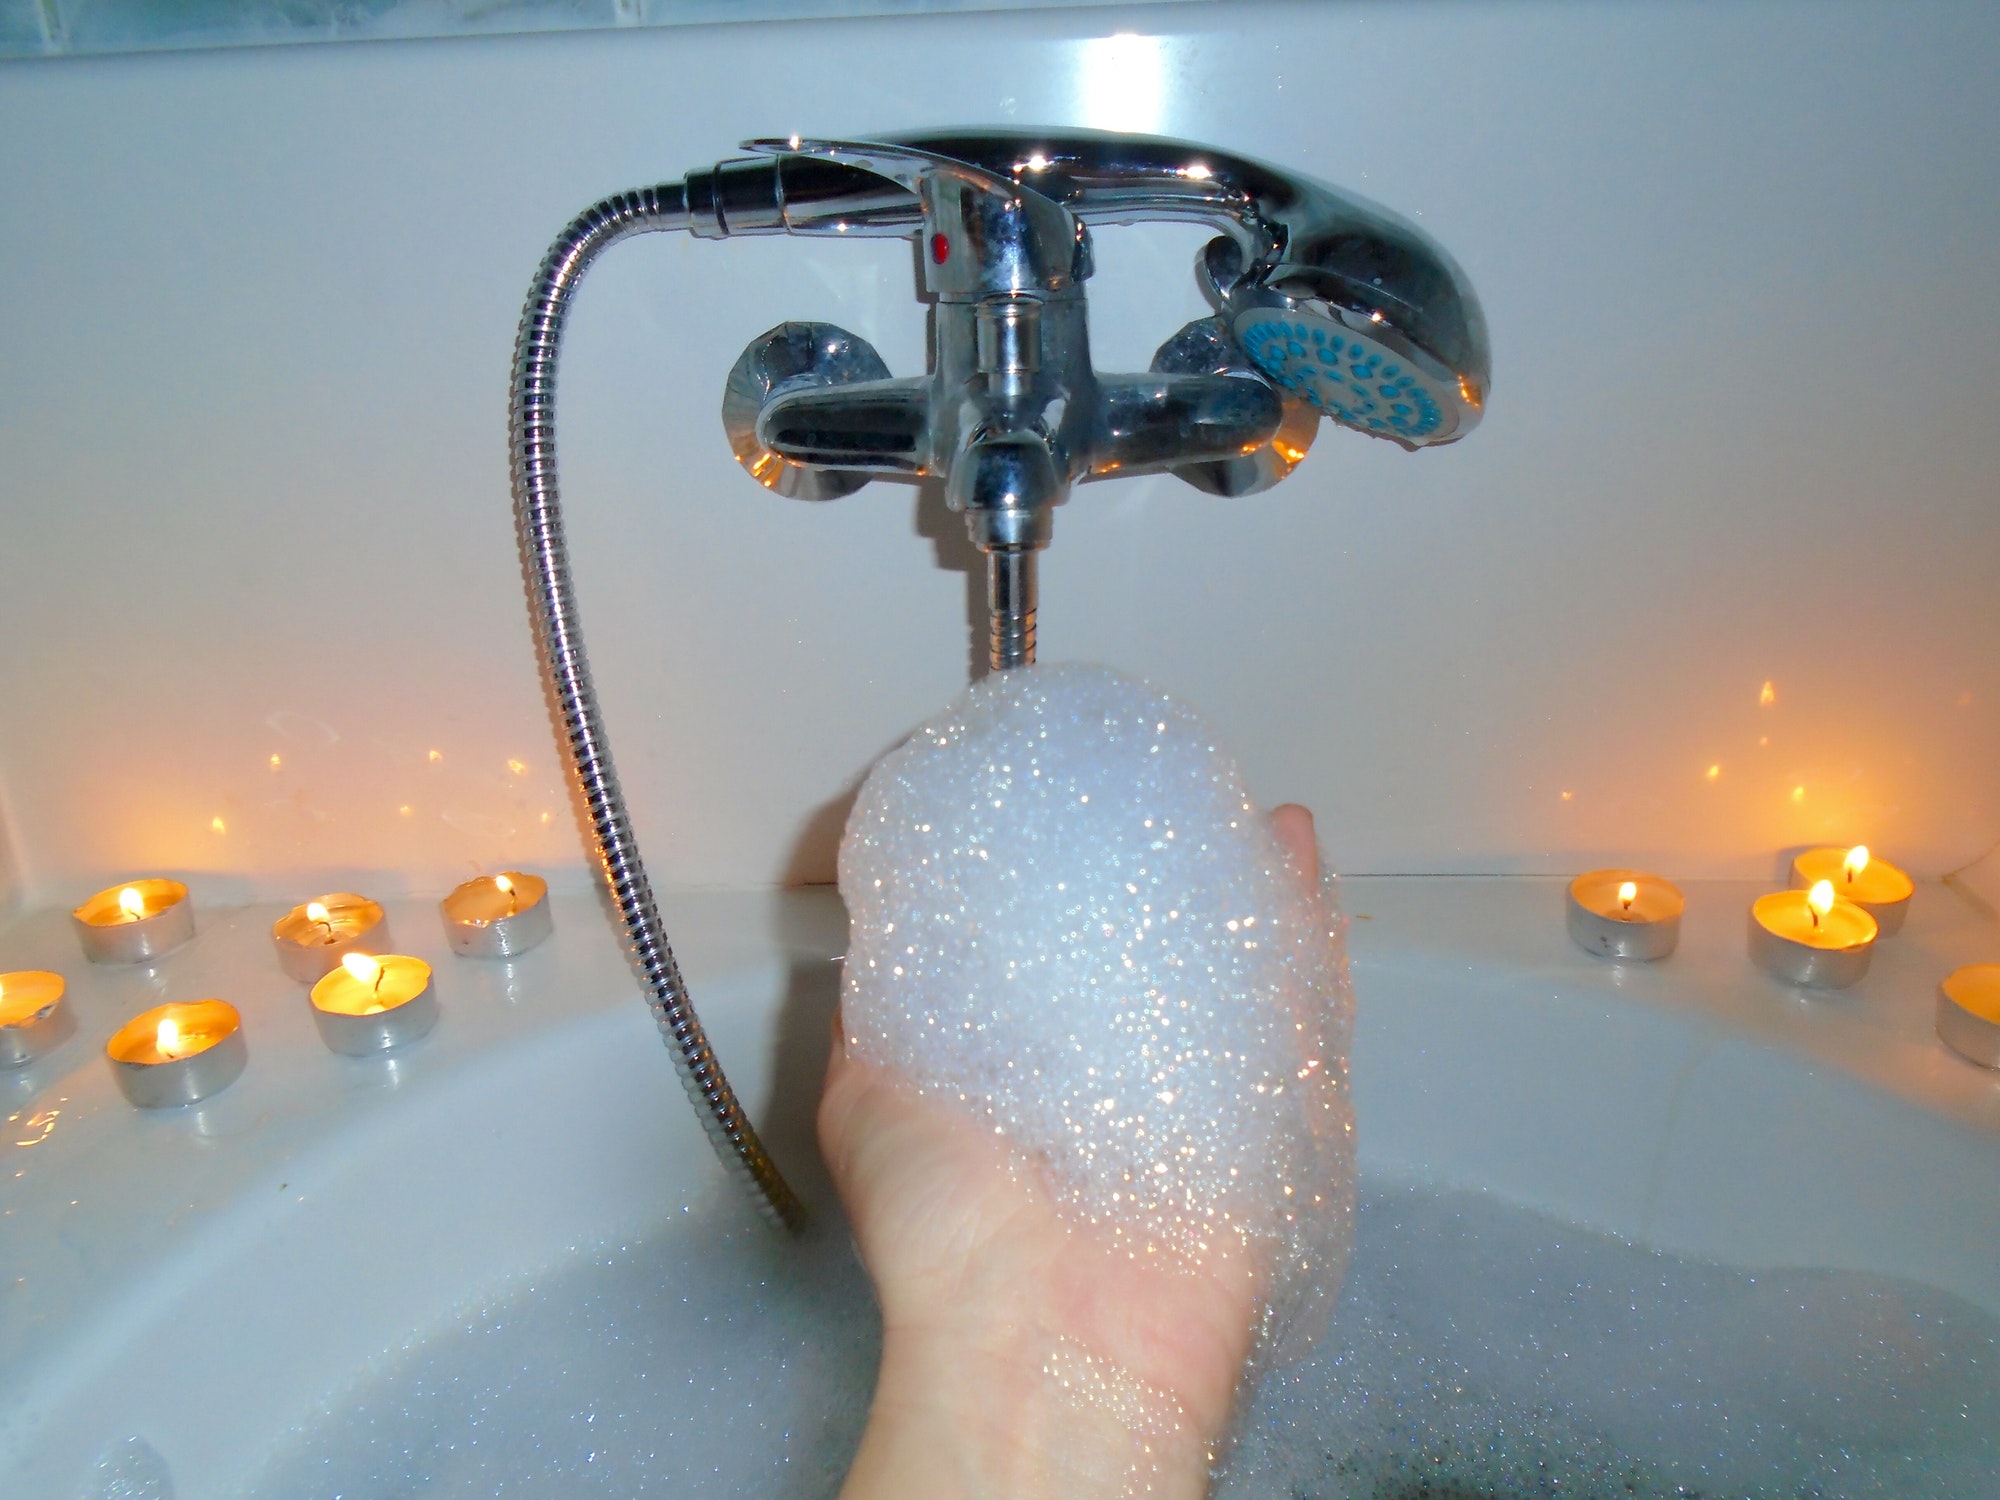 Hand of woman holding foam while taking a bubble bath